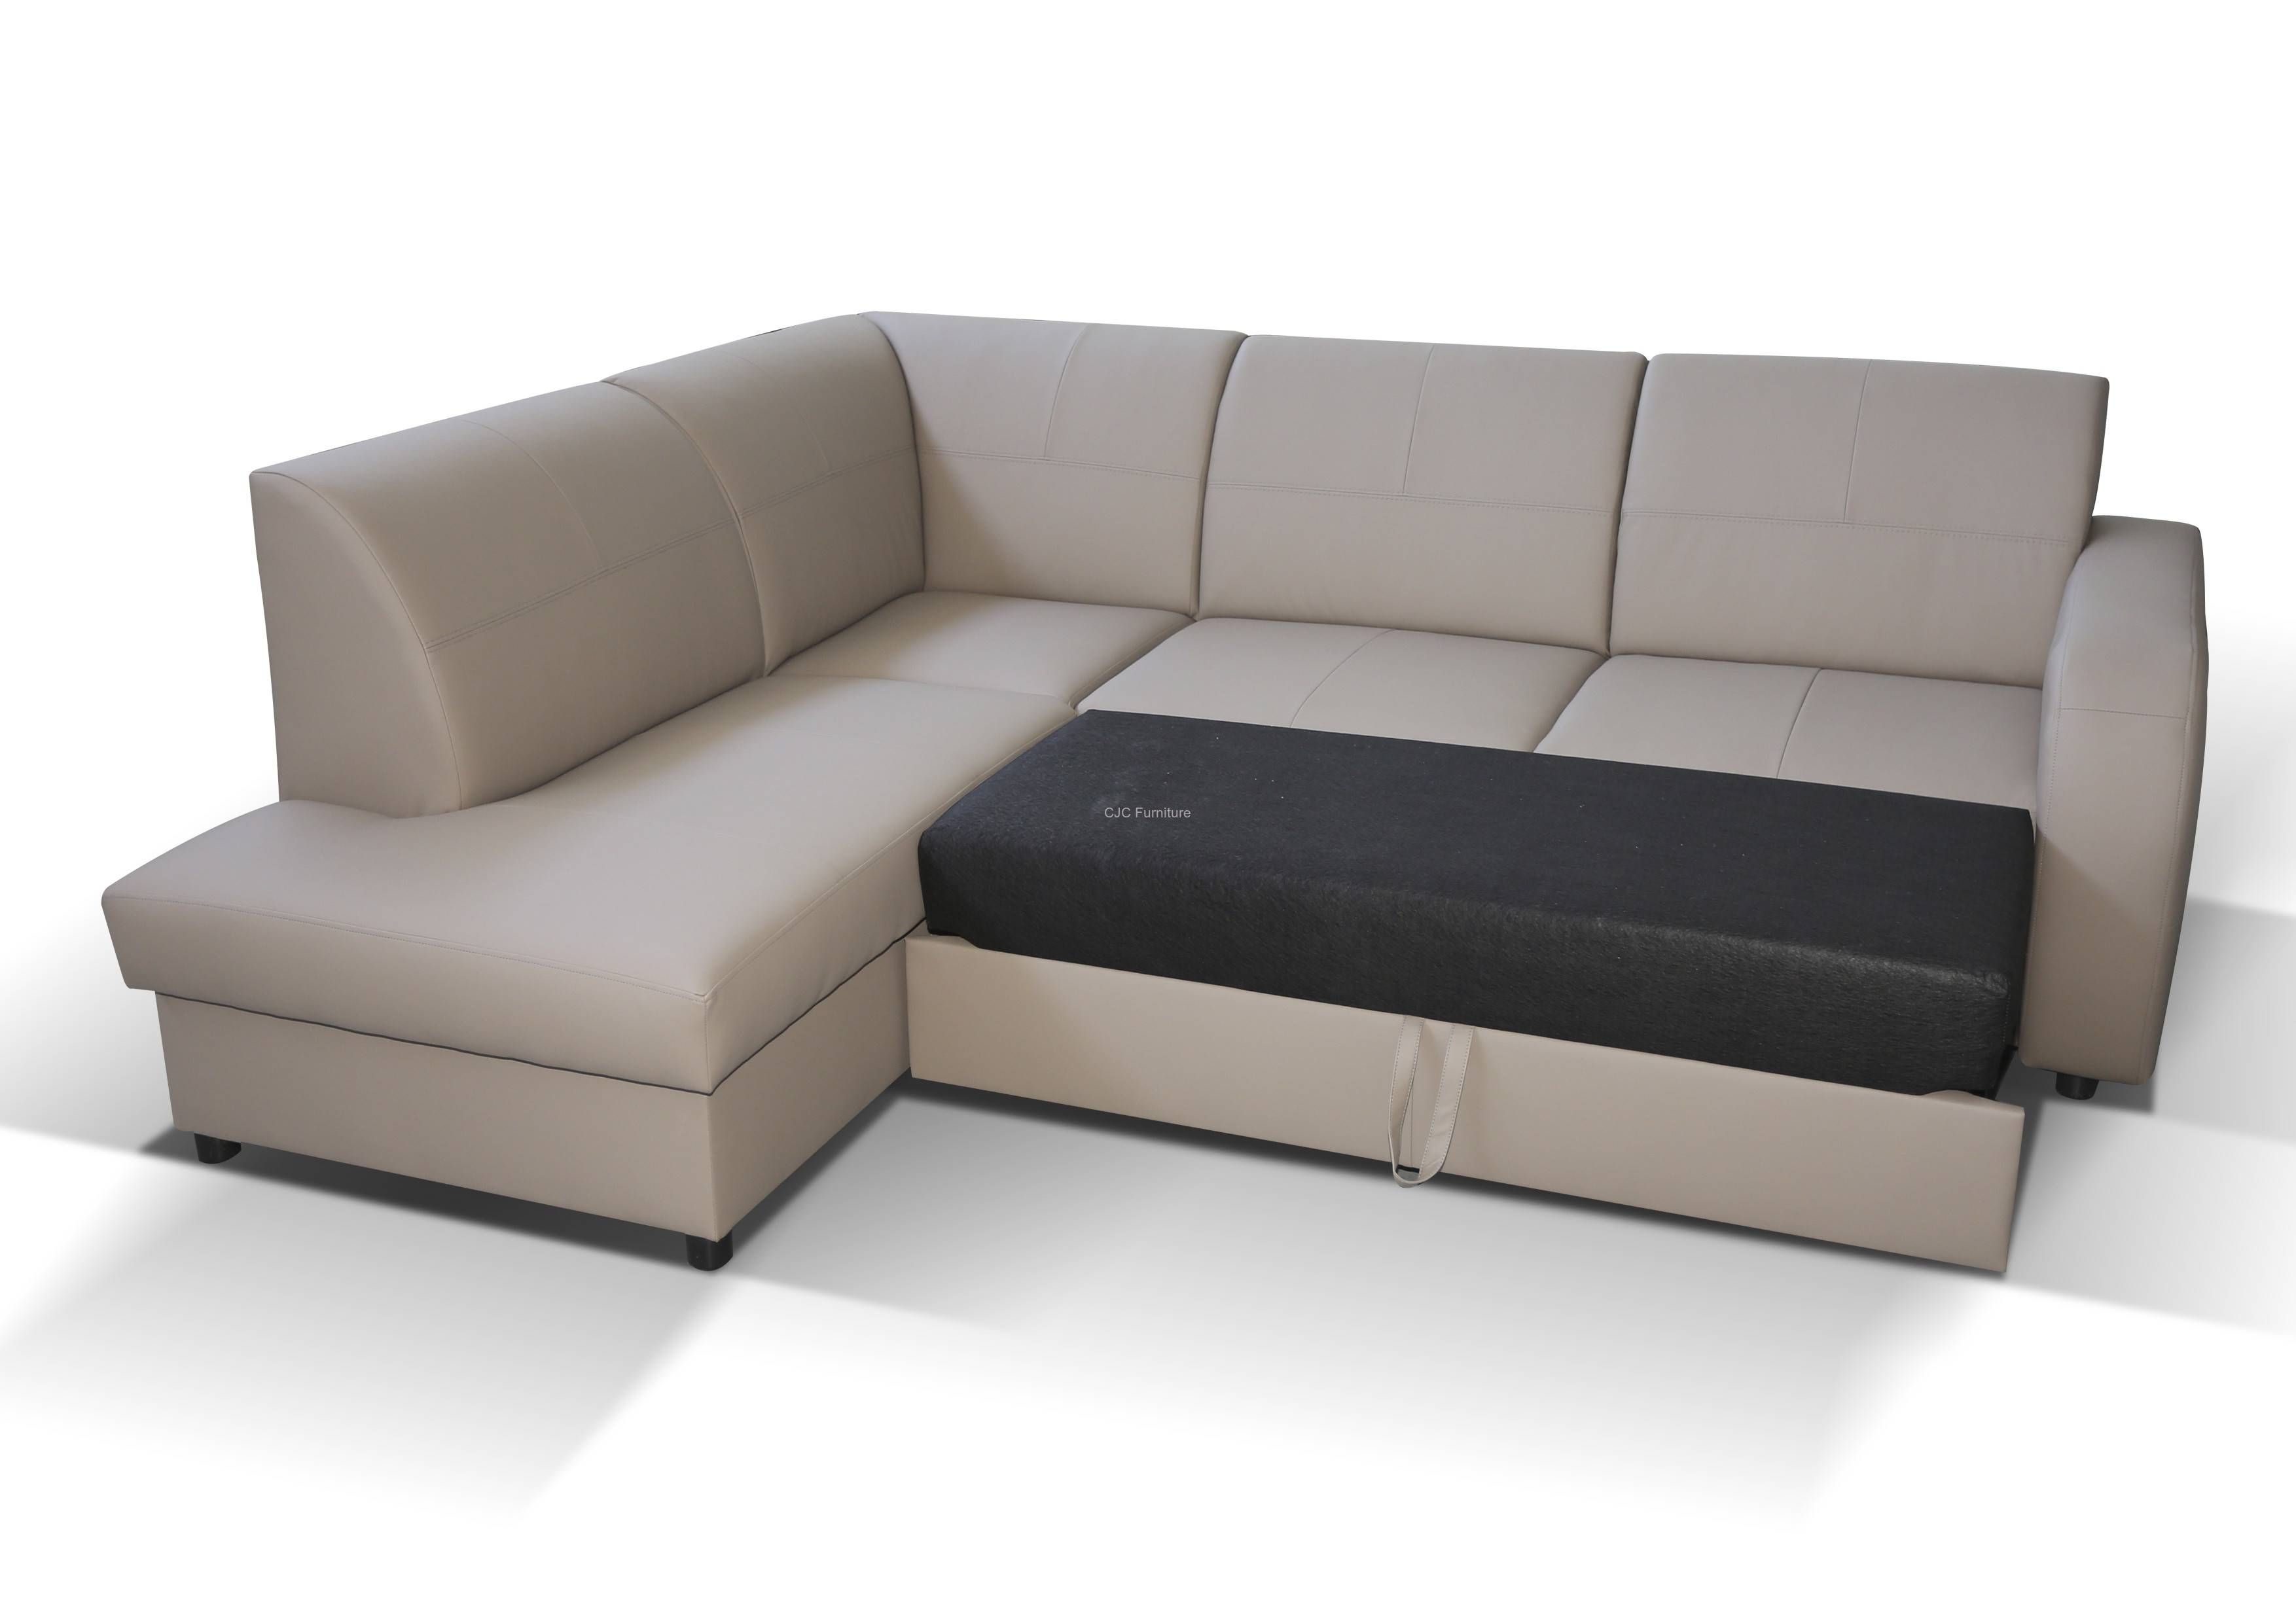 Corner Sofa Bed Style For New Home Design | Eva Furniture With Regard To Leather Corner Sofa Bed (View 12 of 30)